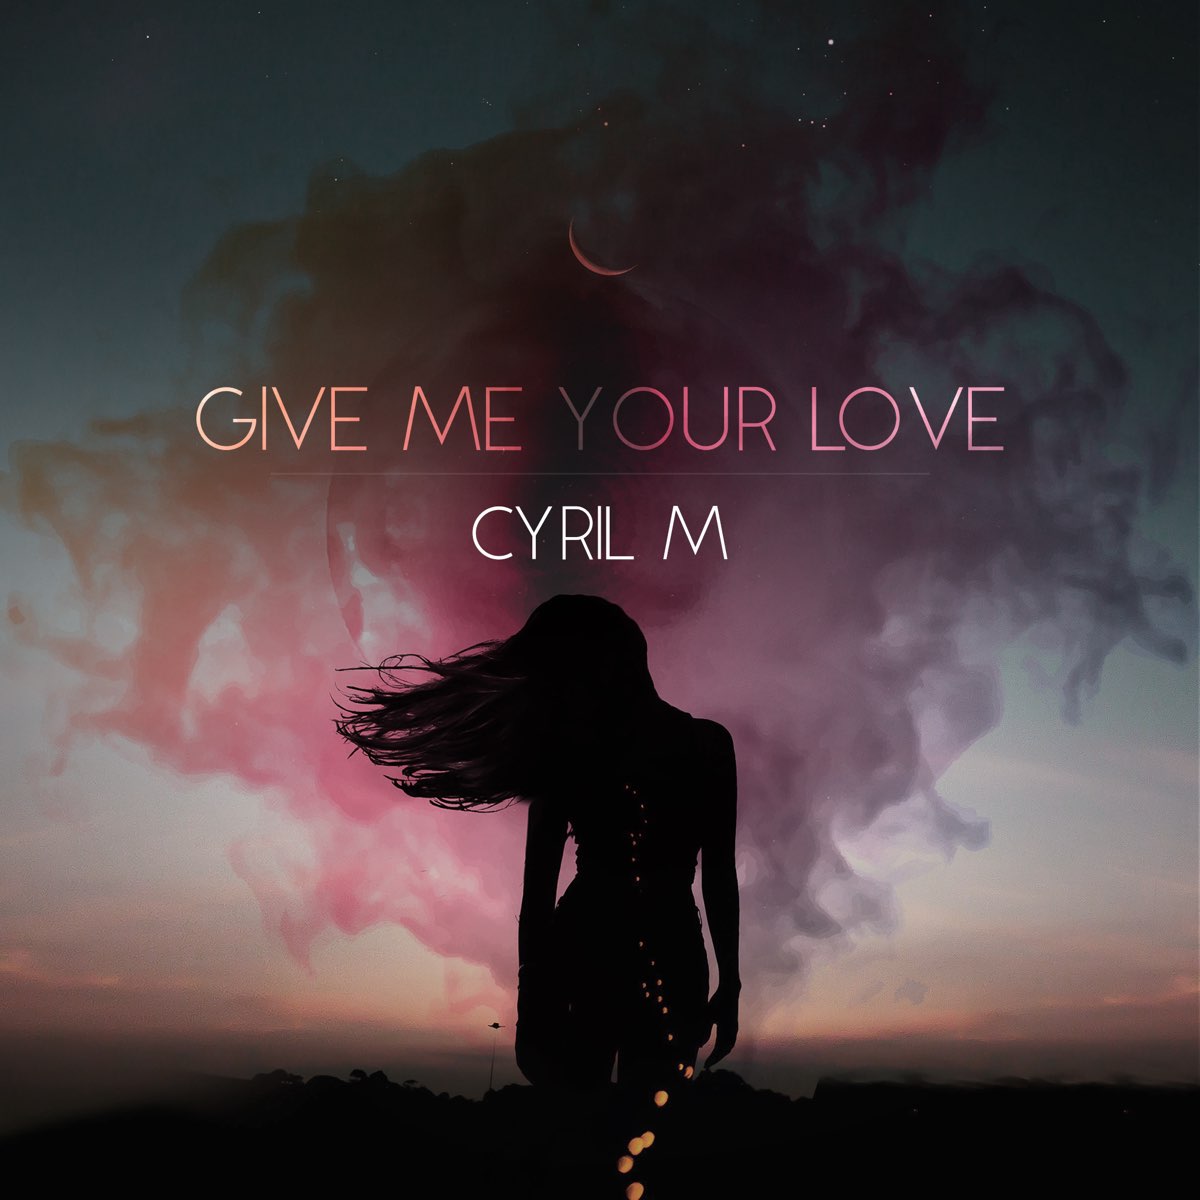 Give love remix